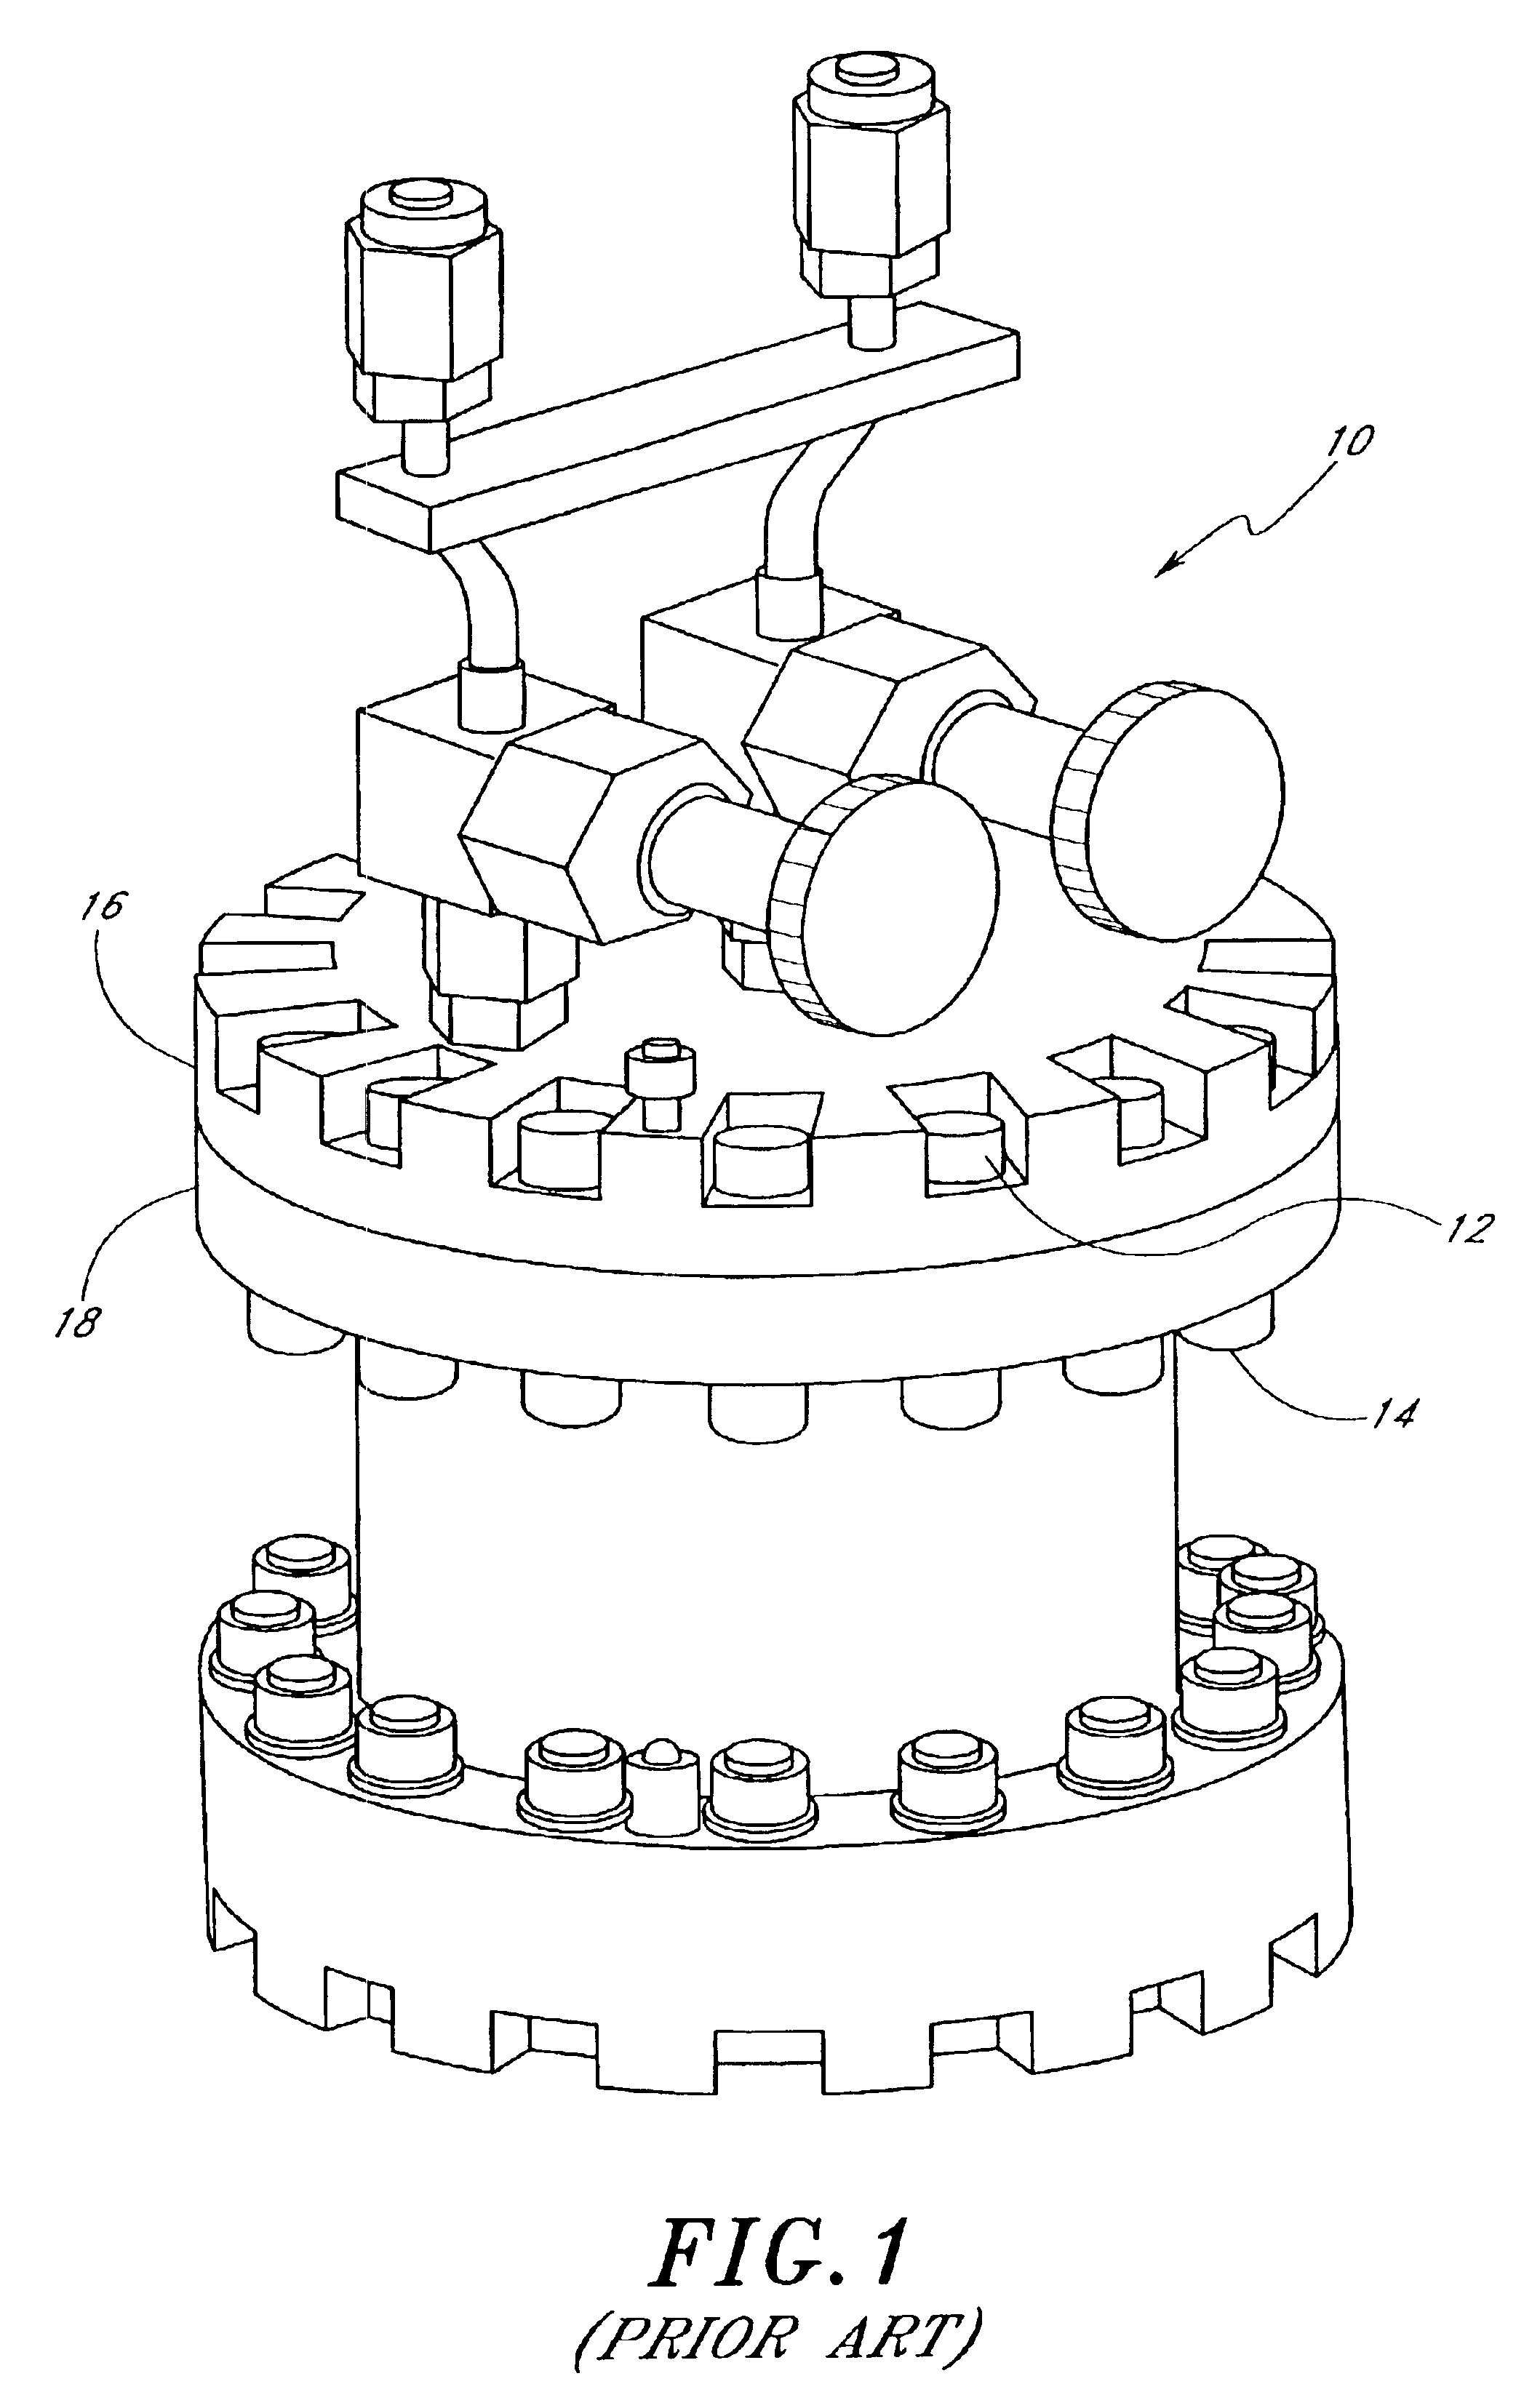 Source chemical container assembly